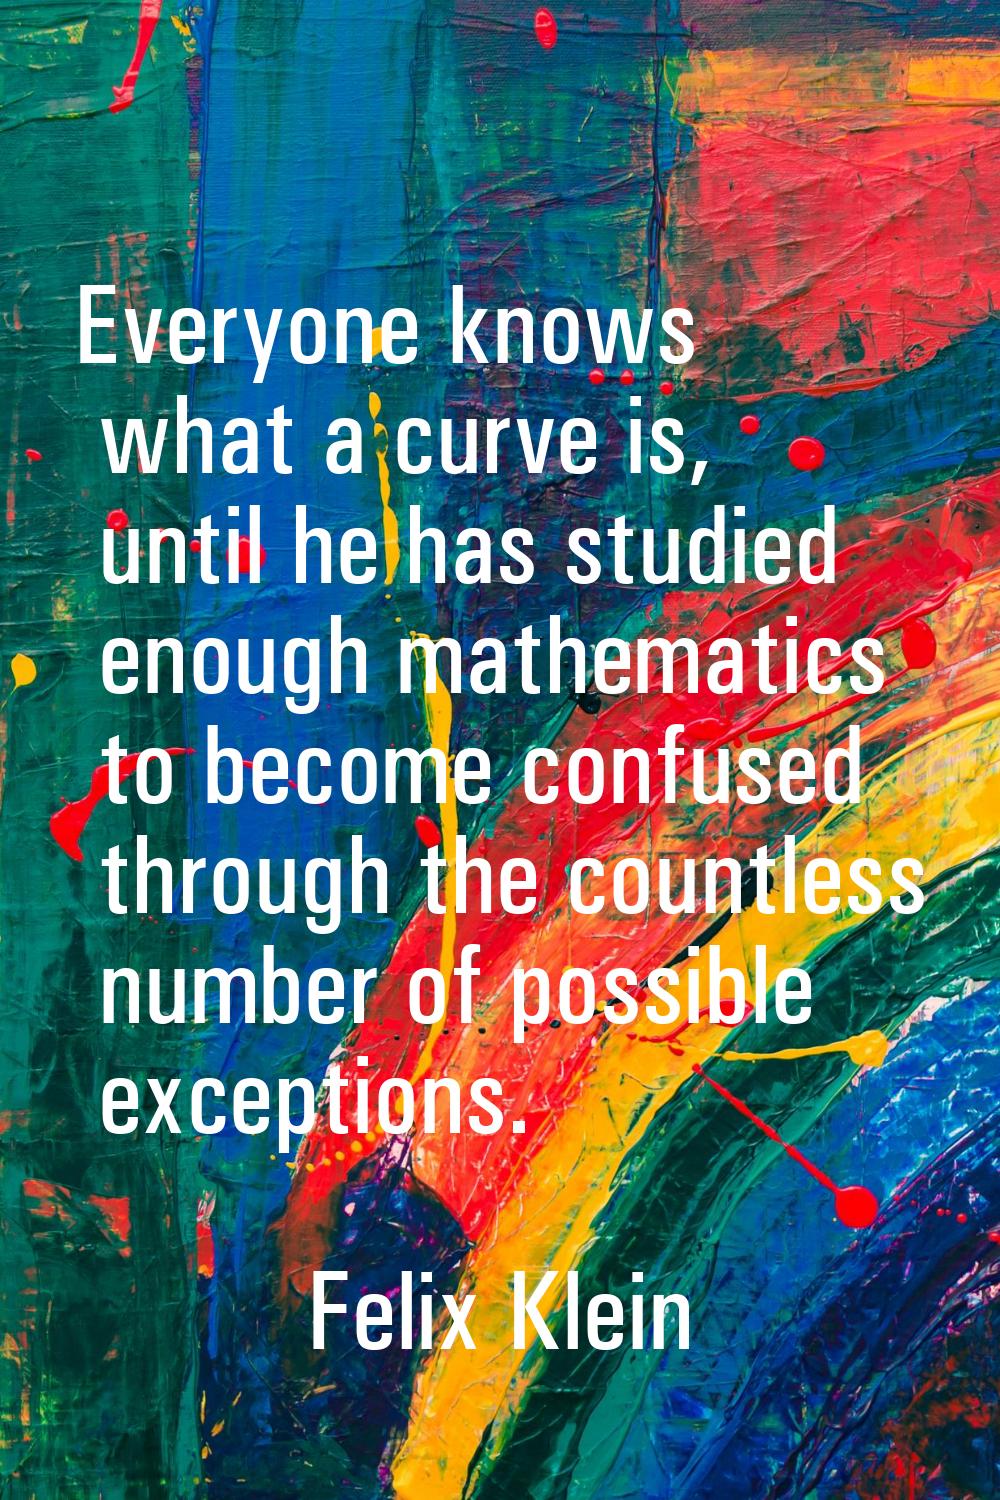 Everyone knows what a curve is, until he has studied enough mathematics to become confused through 